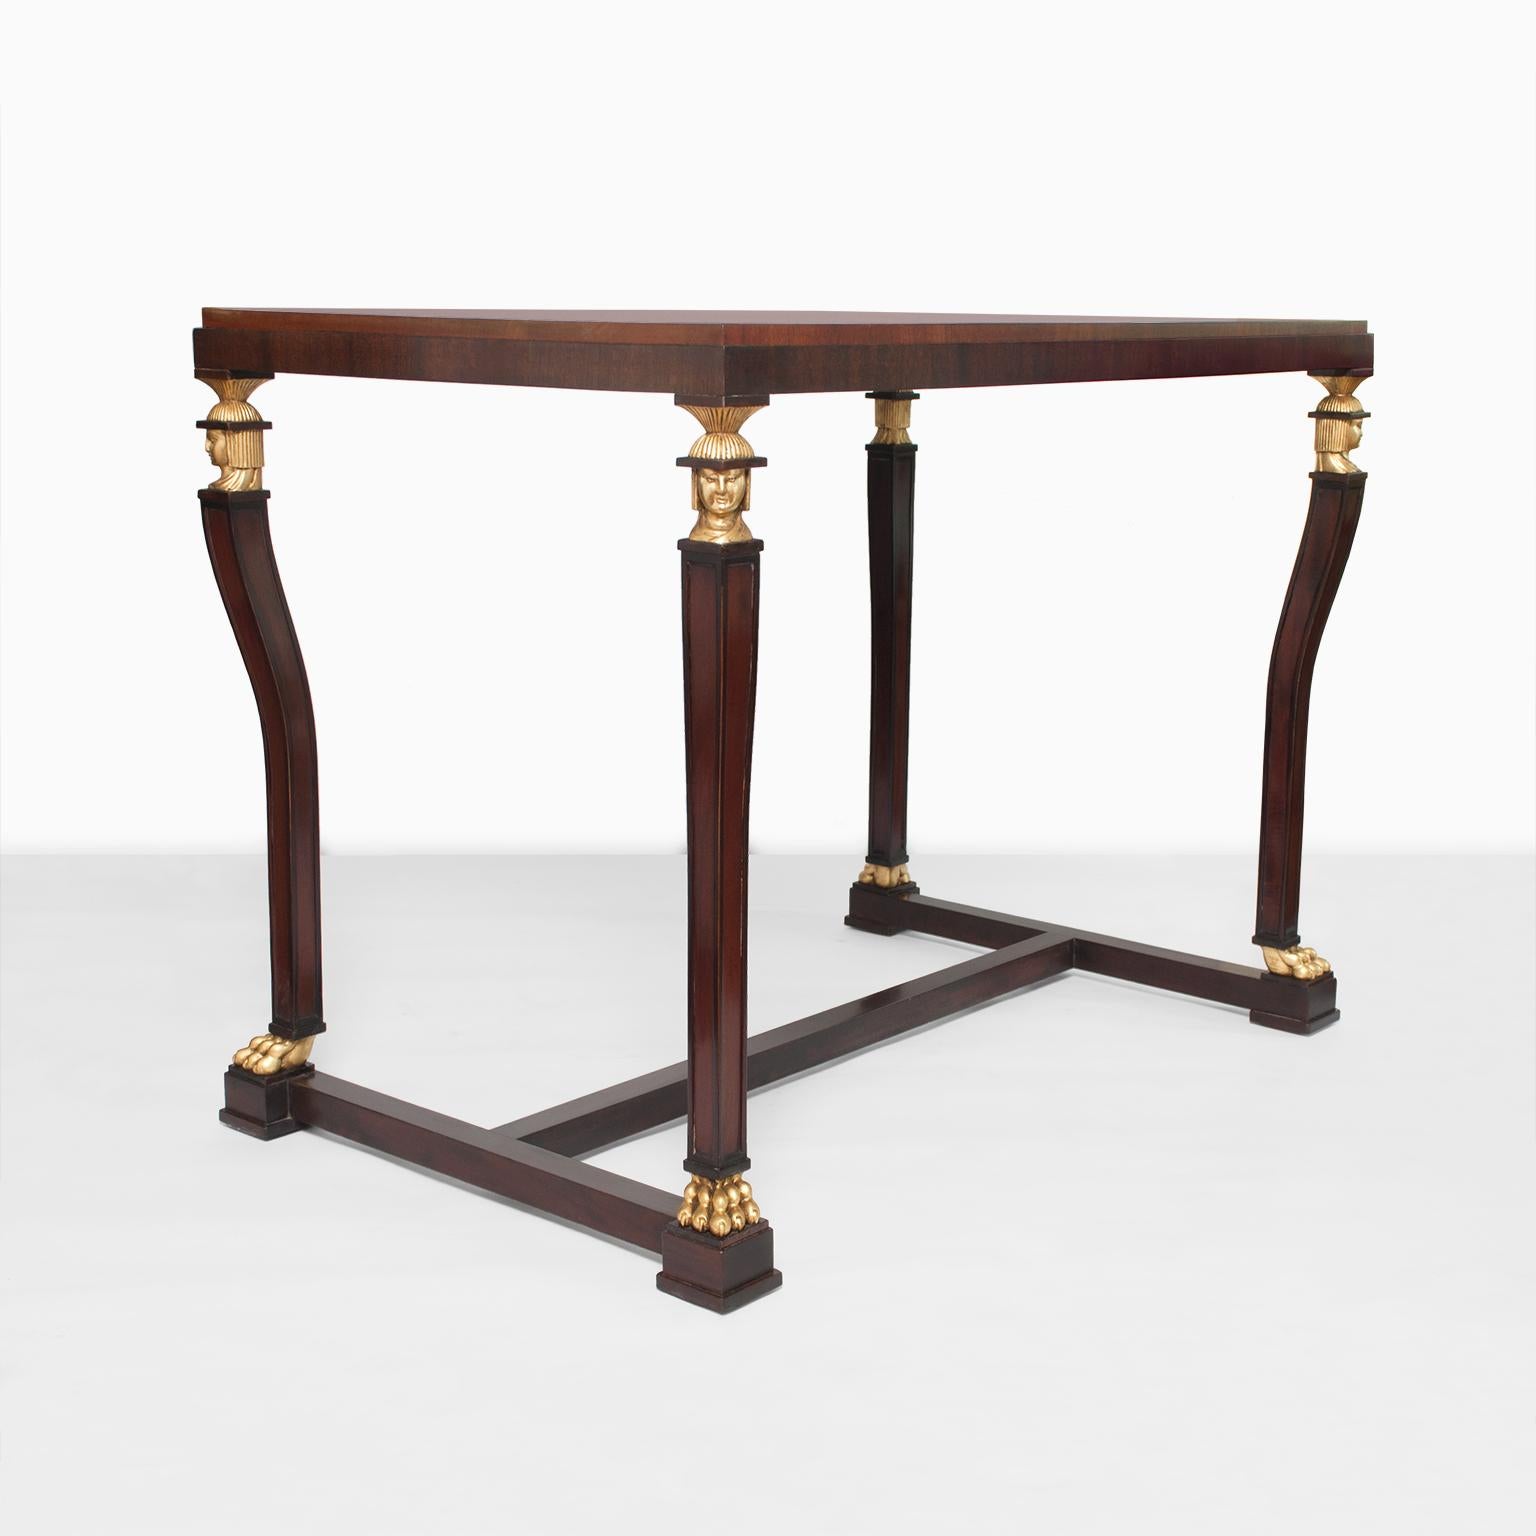 A stunning Axel Einar Hjorth Swedish Grace period (1920- 30) solid mahogany console or center table with carved and parcel gilt Caryatid heads and claw feet. The top is veneered with Cuban flame mahogany. Exceptional quality, fully